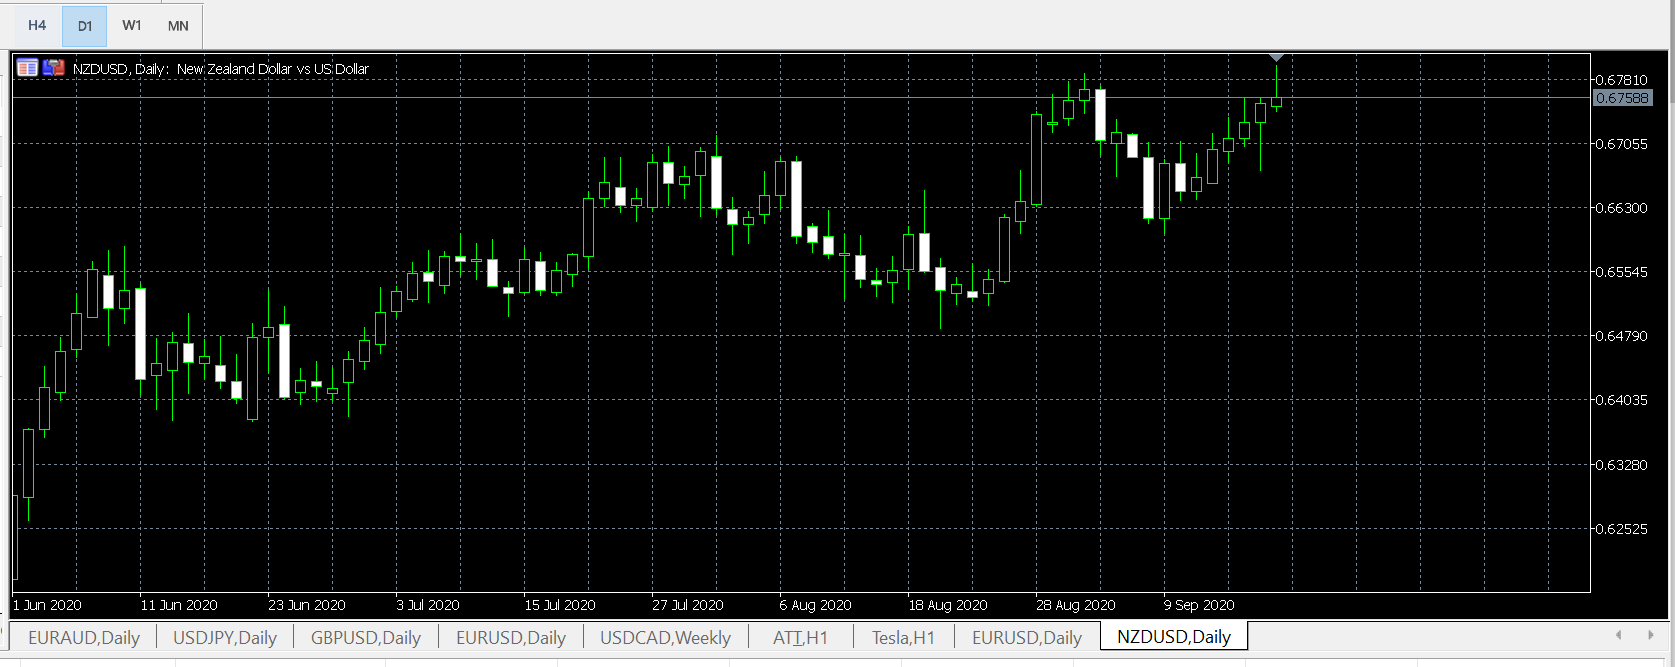 Thi truong Forex 